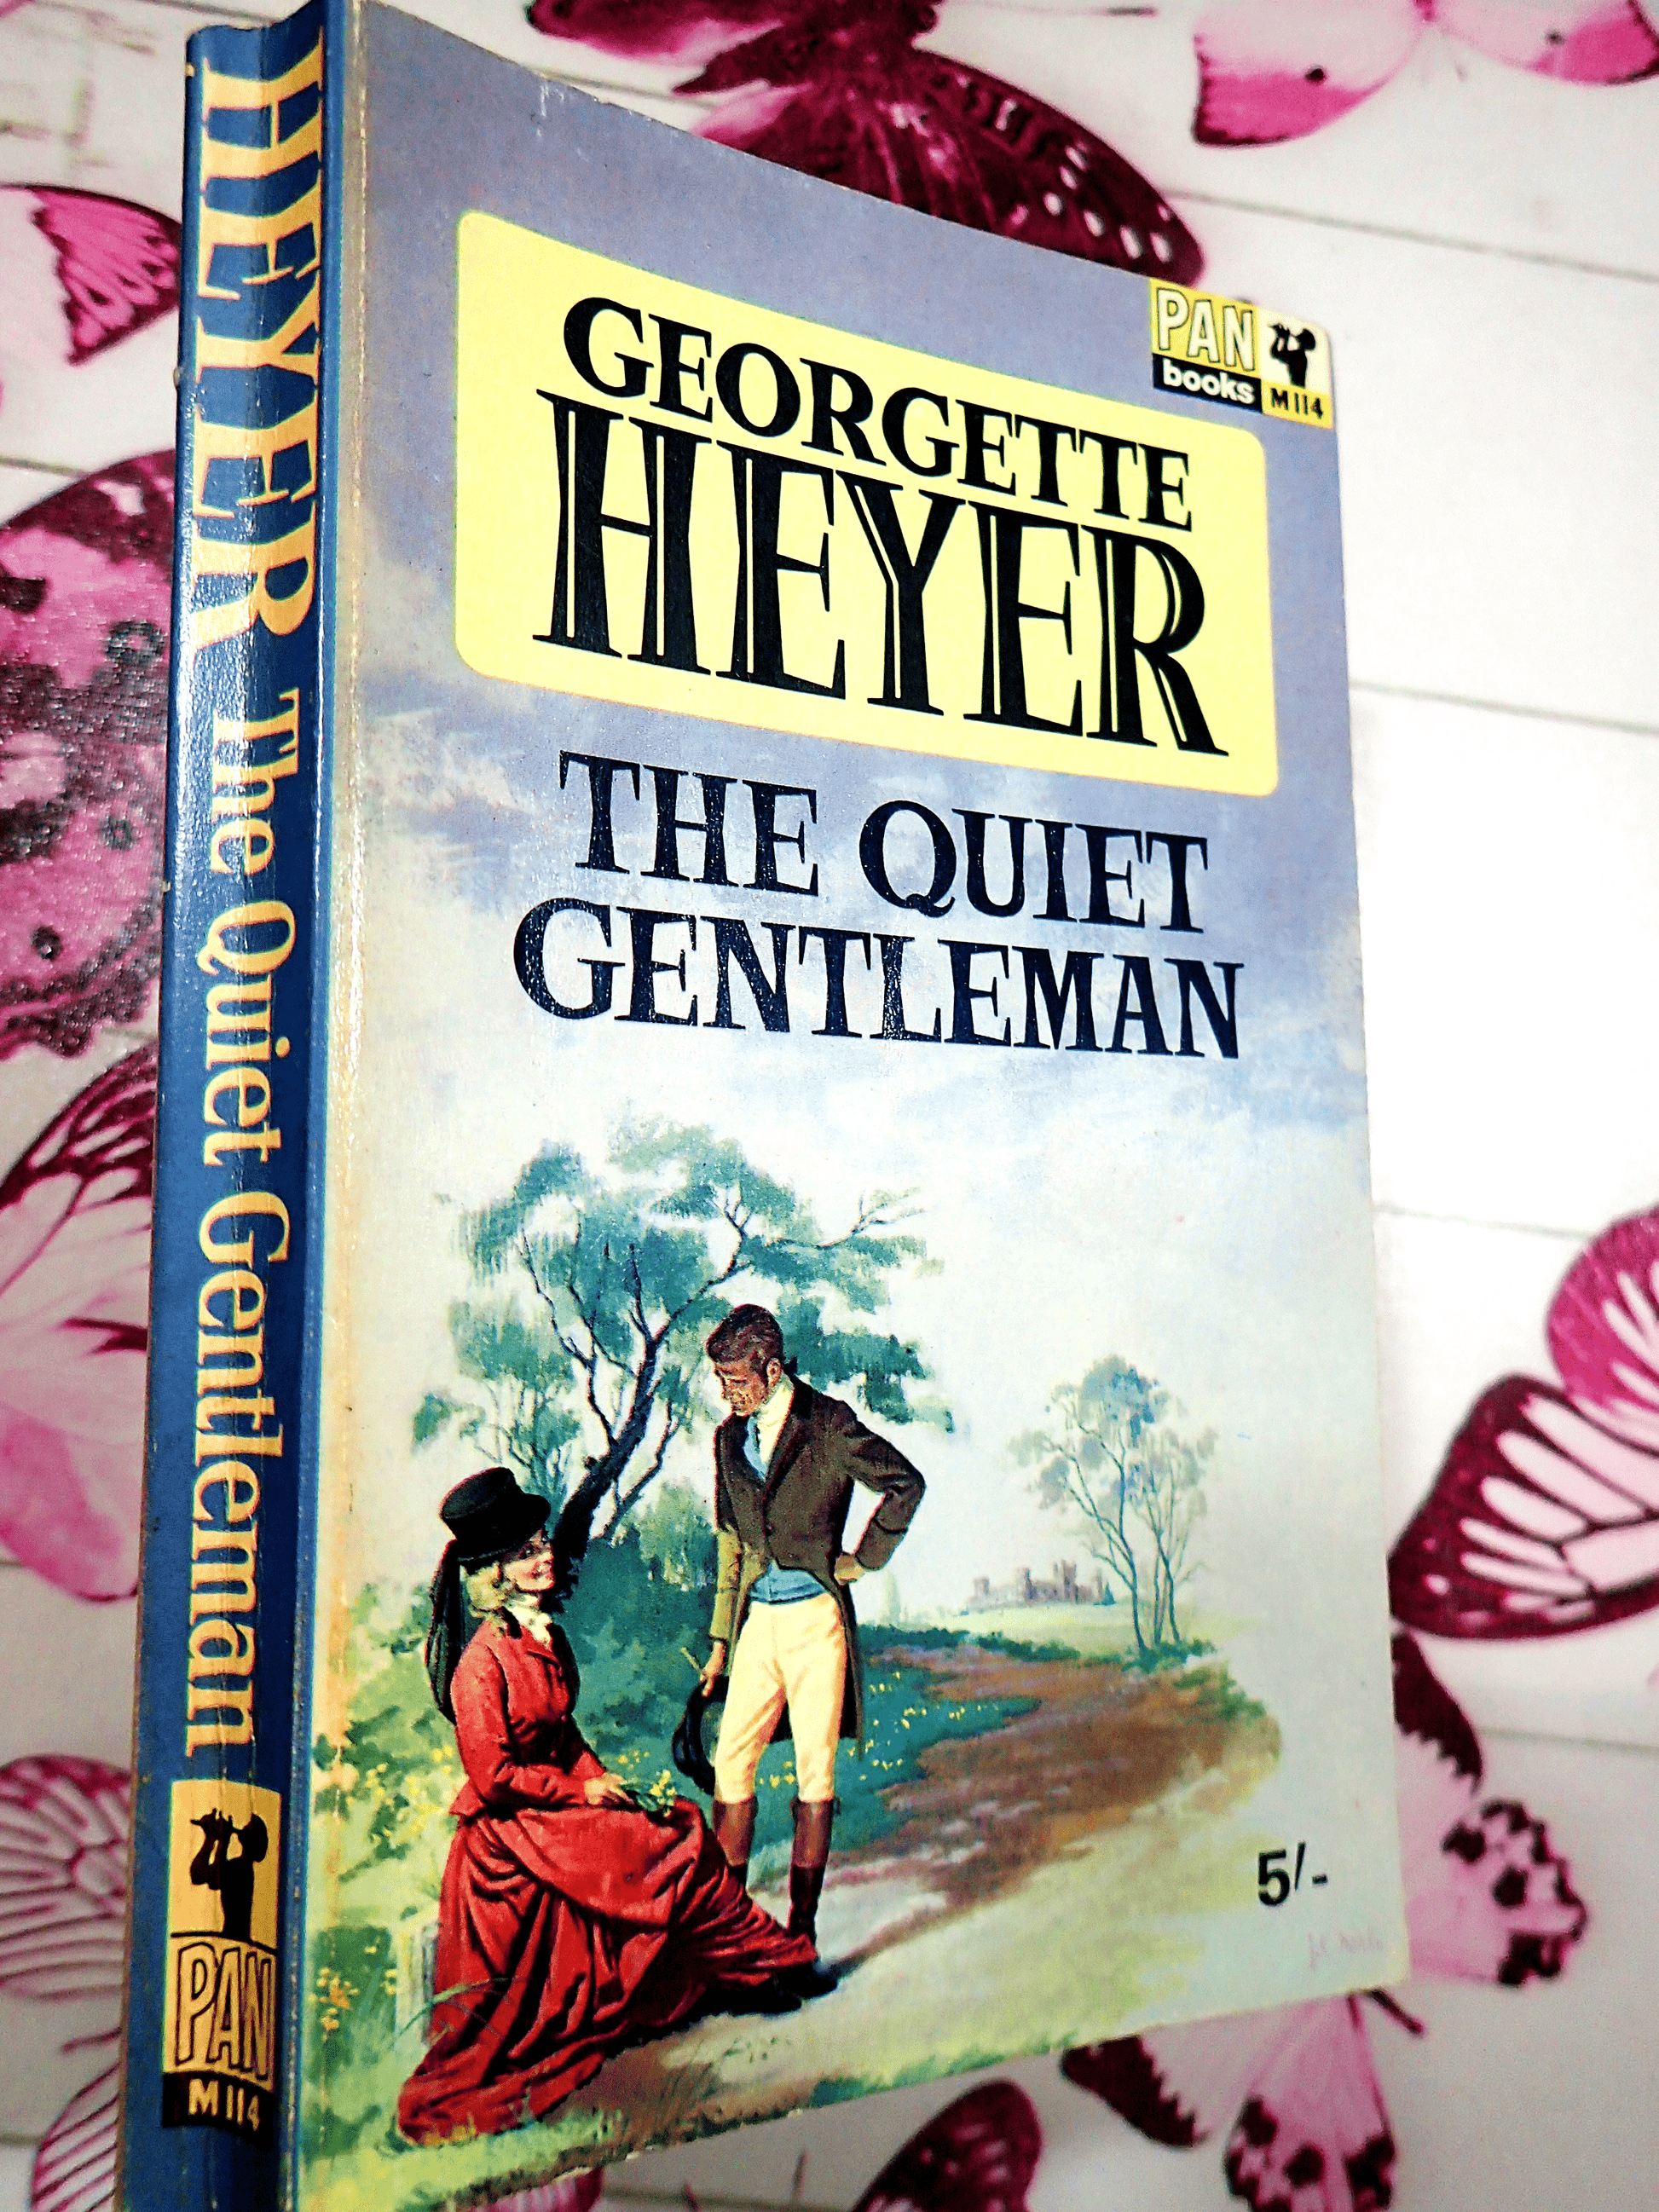 Spine and front cover of The Quiet Gentleman Georgette Heyer